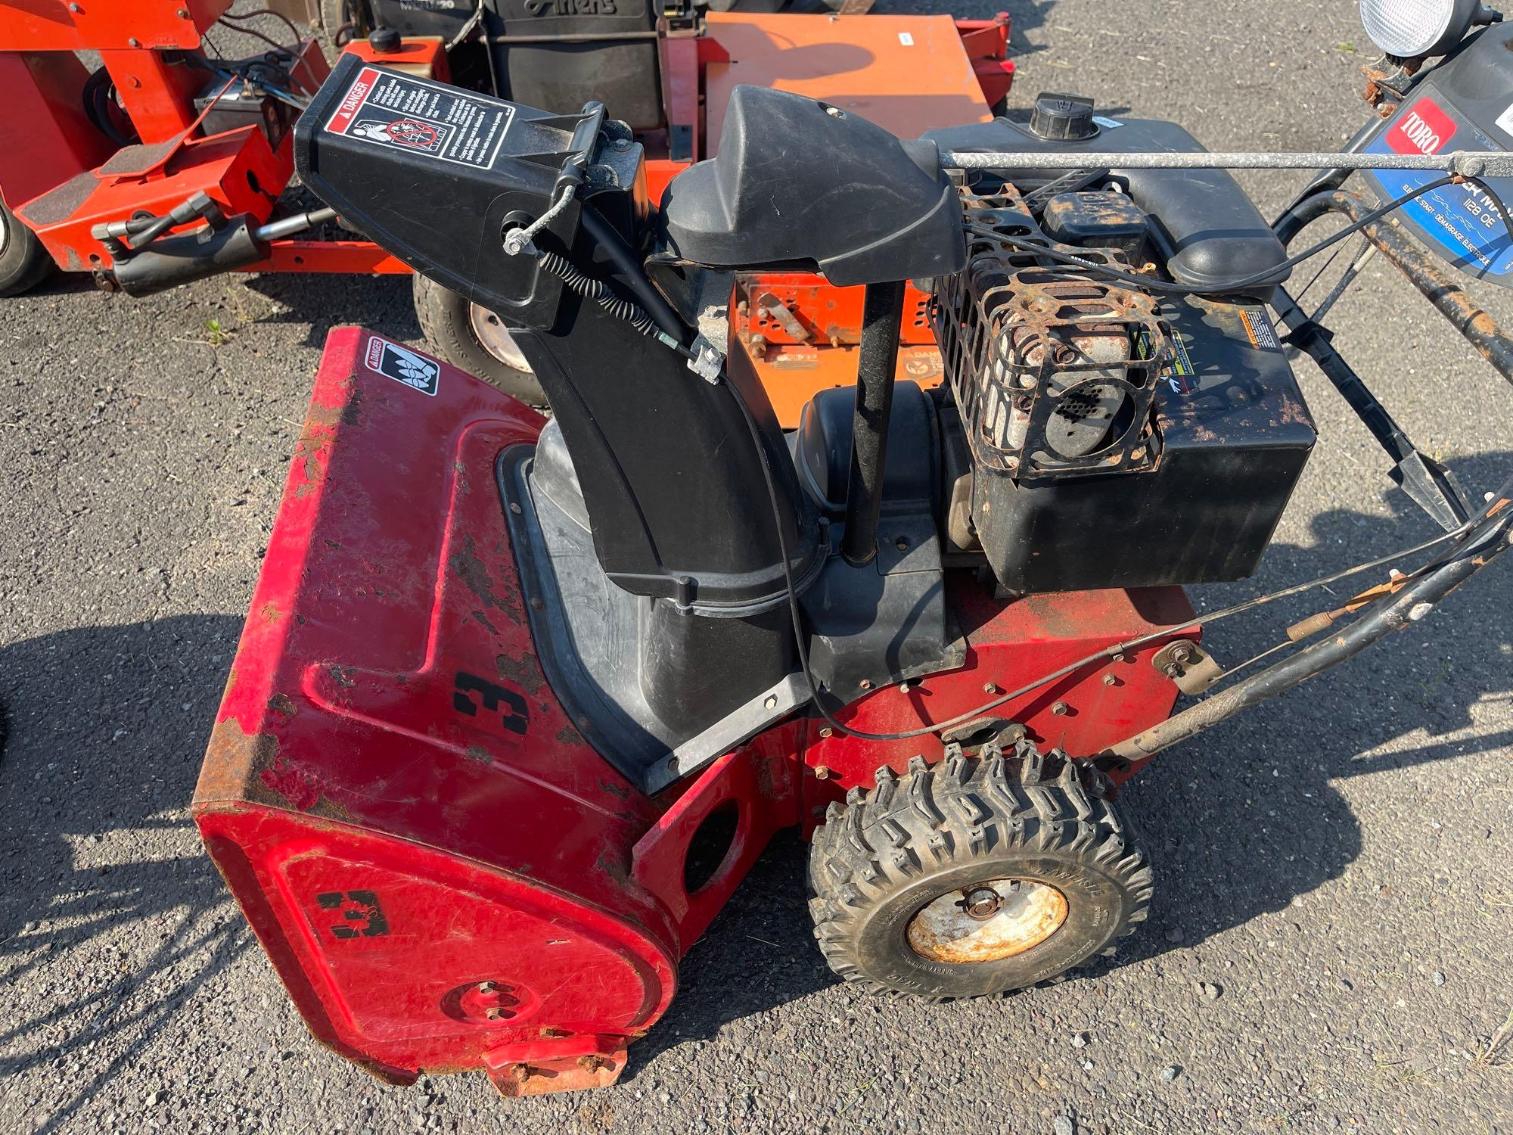 Image for TORO Pro Max 1128 OE Snow Blower- per seller: runs, pull cord broke will start with electric start